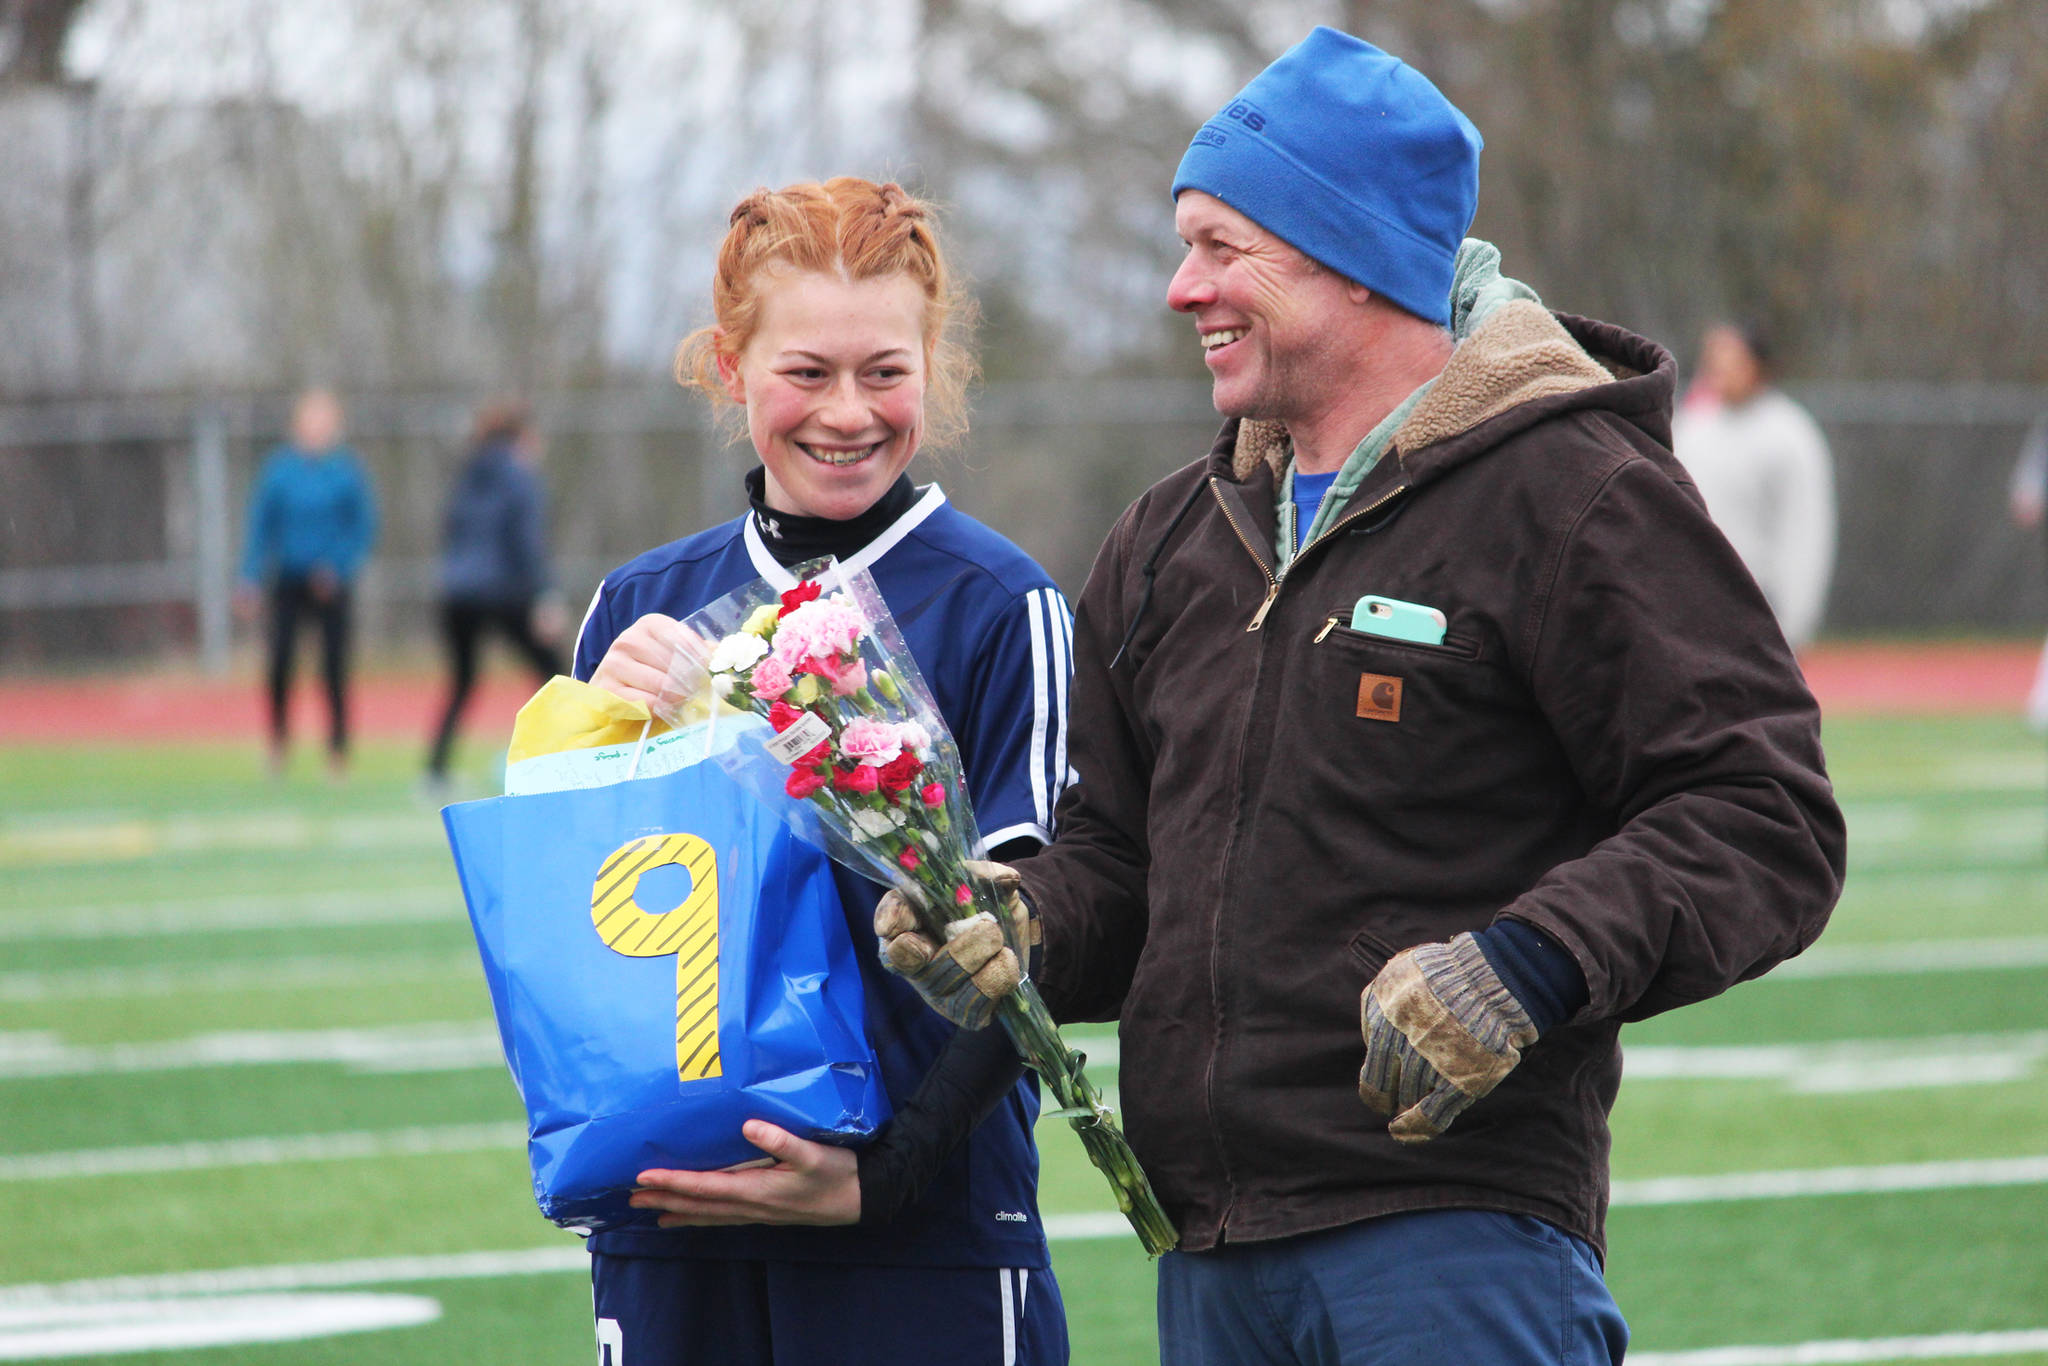 Forward and midfielder Sienna Carey stands with her father during a Senior Night recognition ceremony between the girls and boys soccer games Friday, May 10, 2019 at Homer High School in Homer, Alaska. (Photo by Megan Pacer/Homer News)